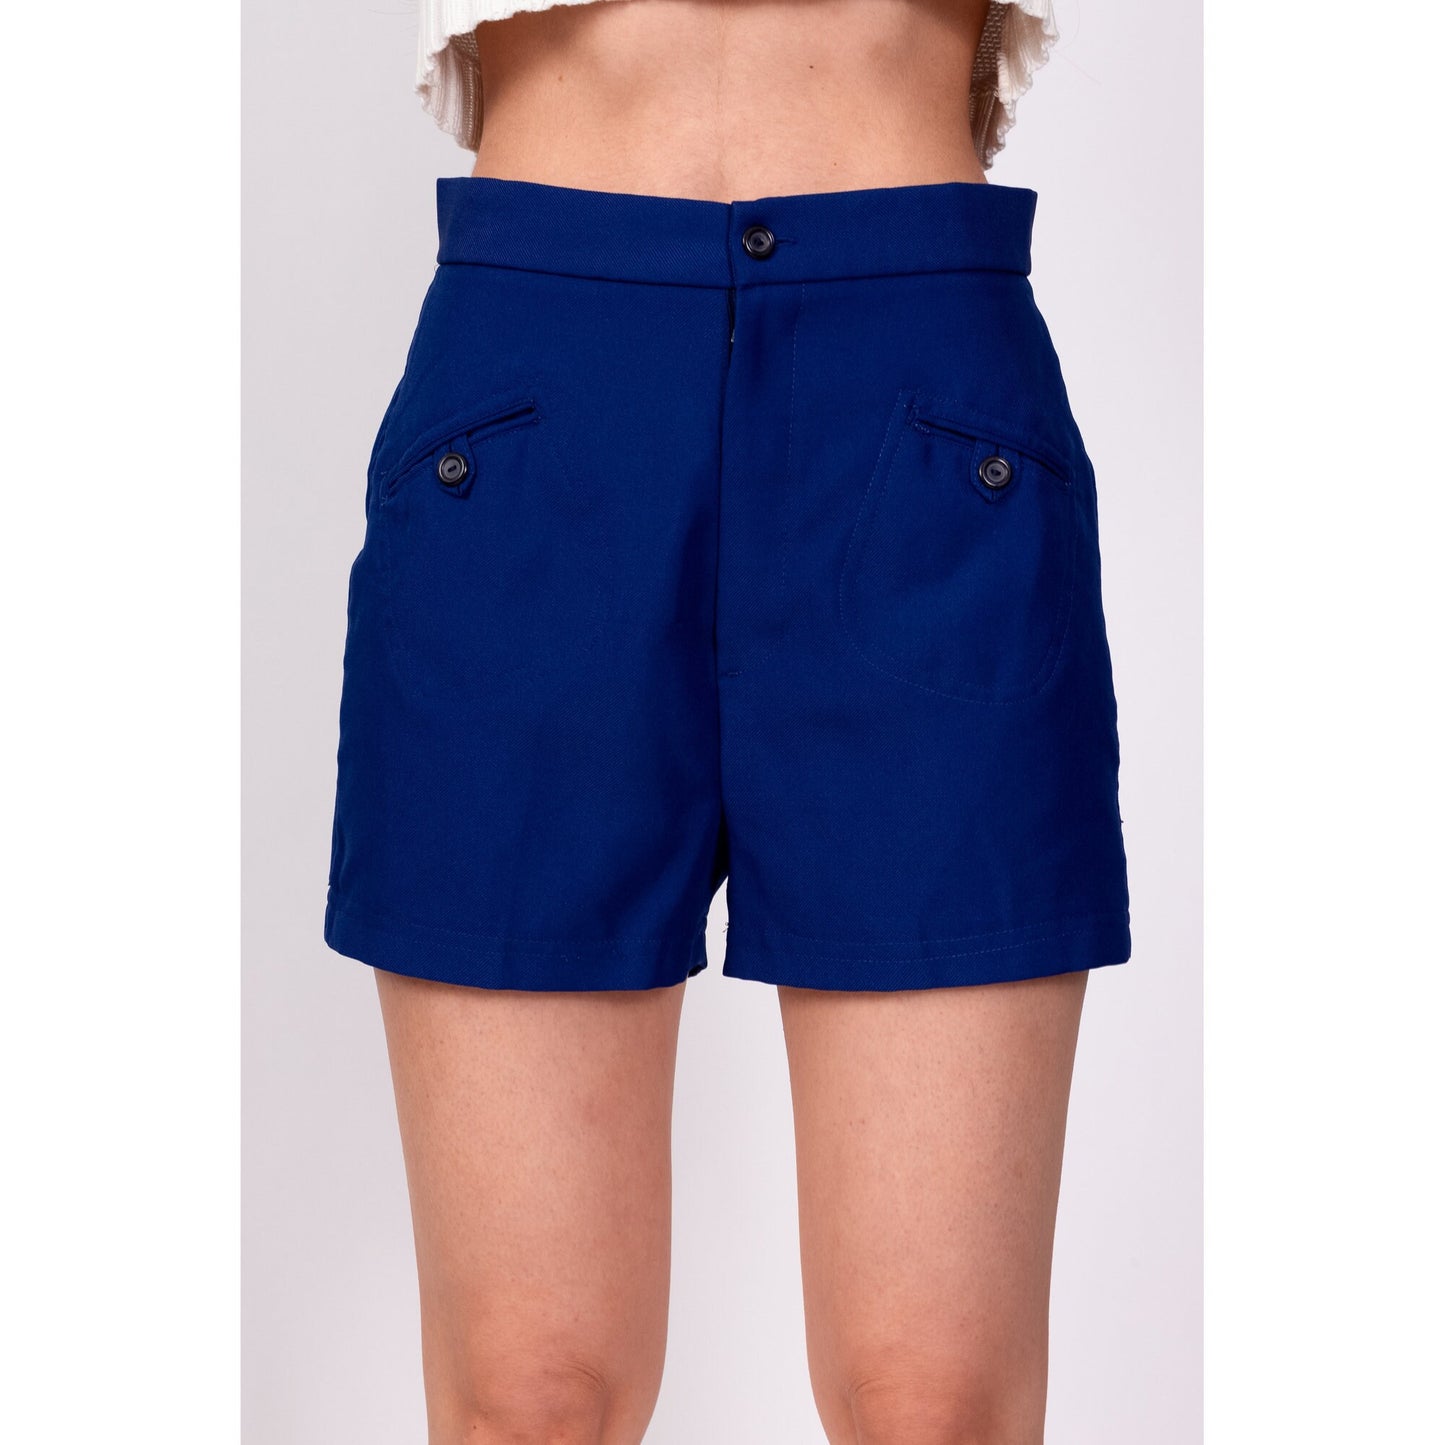 70s Royal Blue High Waisted Shorts - XS to Petite Small, 25.5" 